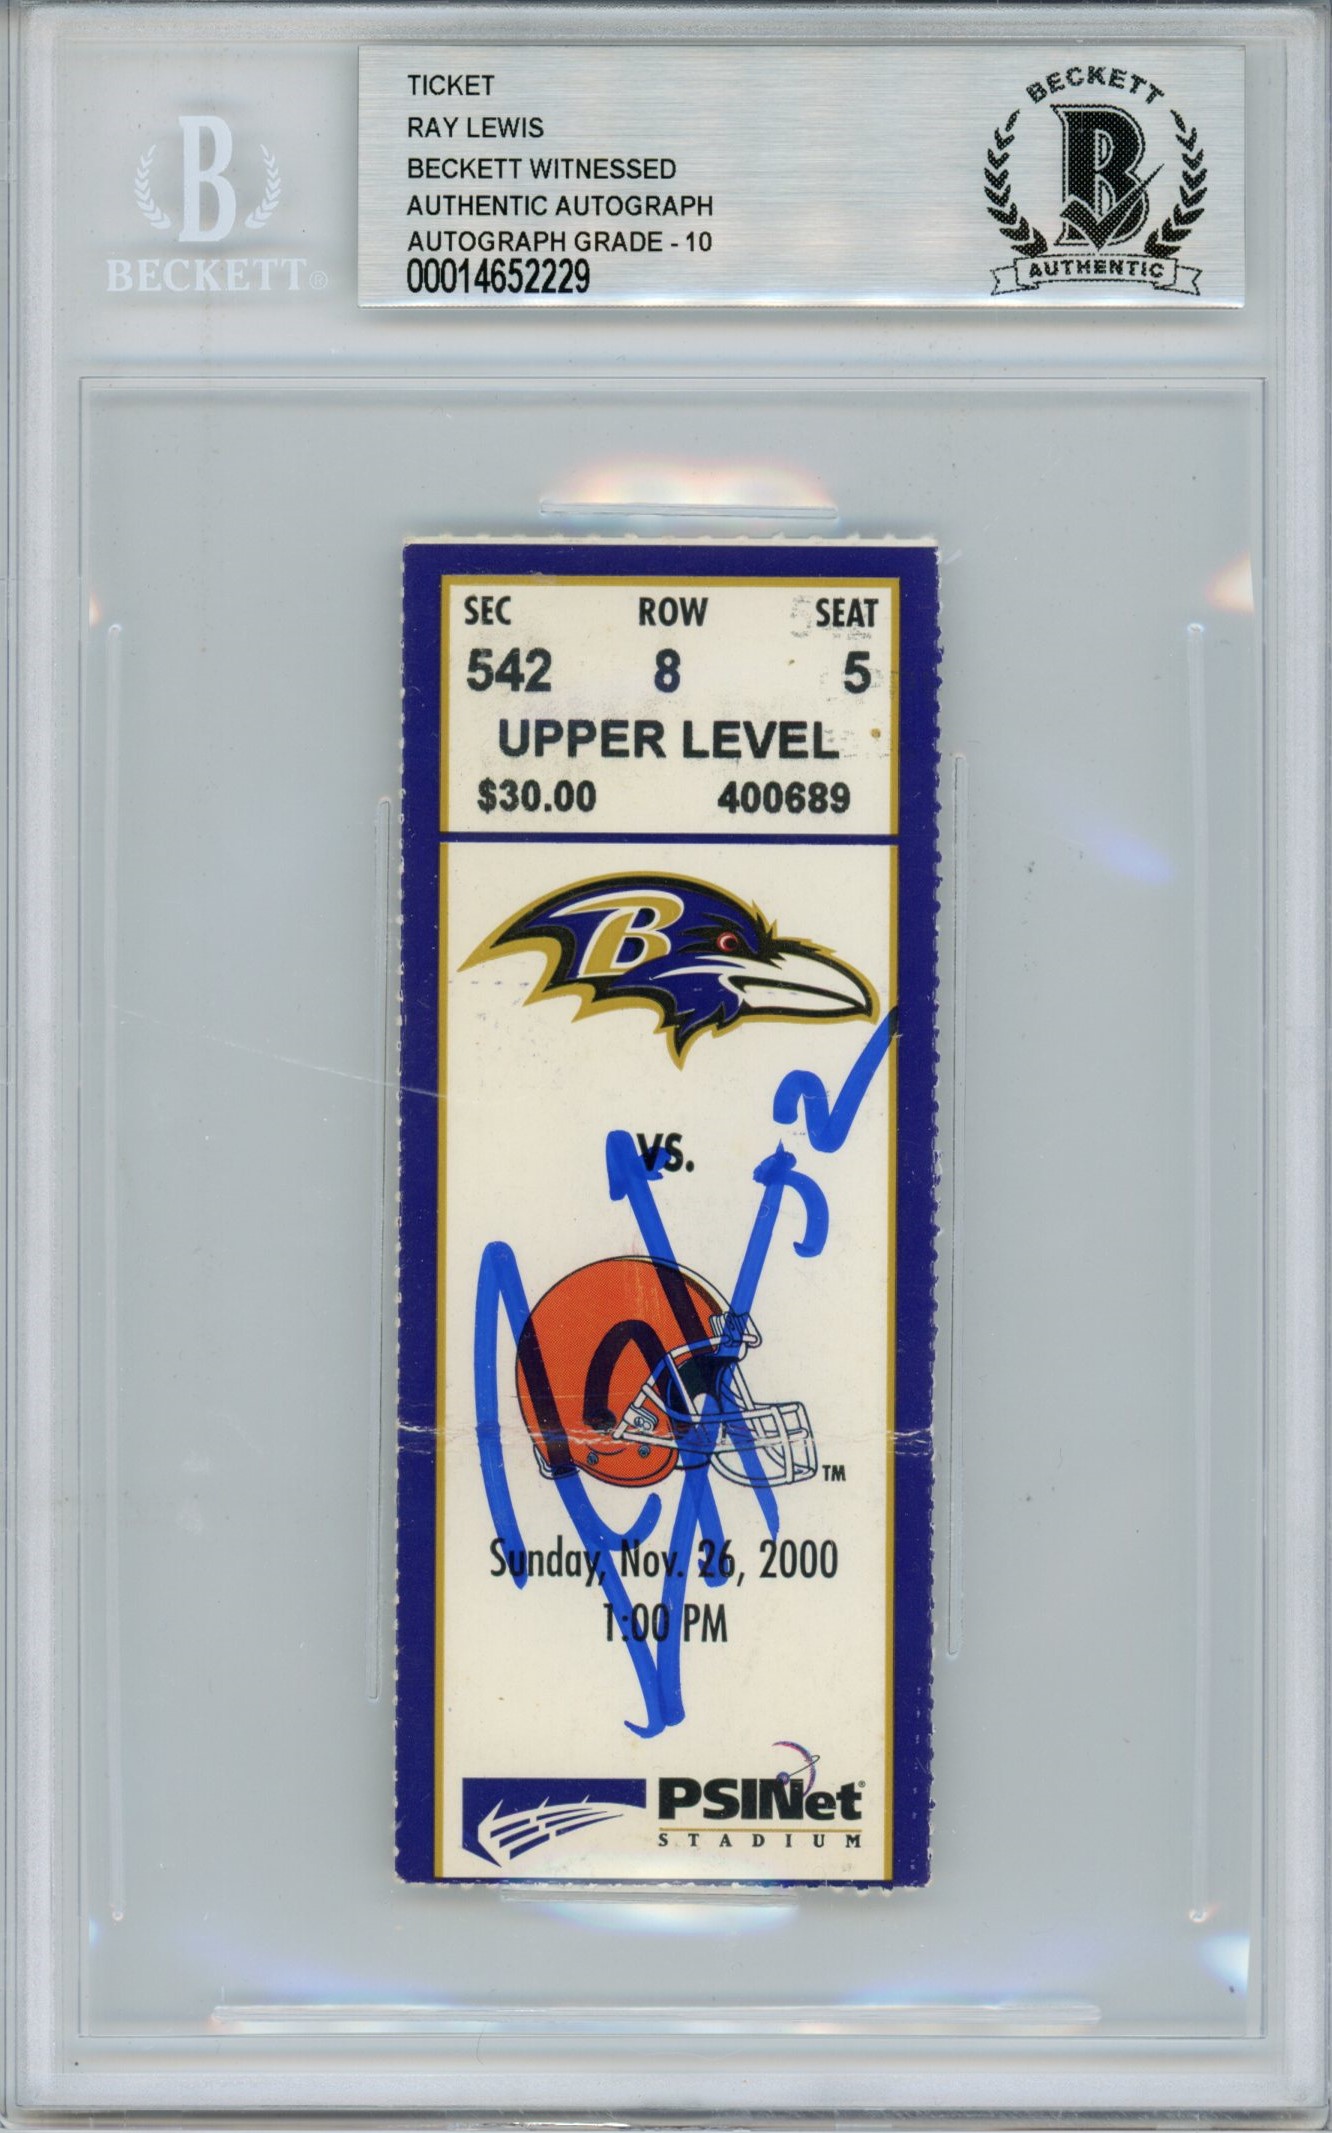 Ray Lewis Signed Baltimore Ravens Ticket 11/26/00 vs Browns BAS Slab